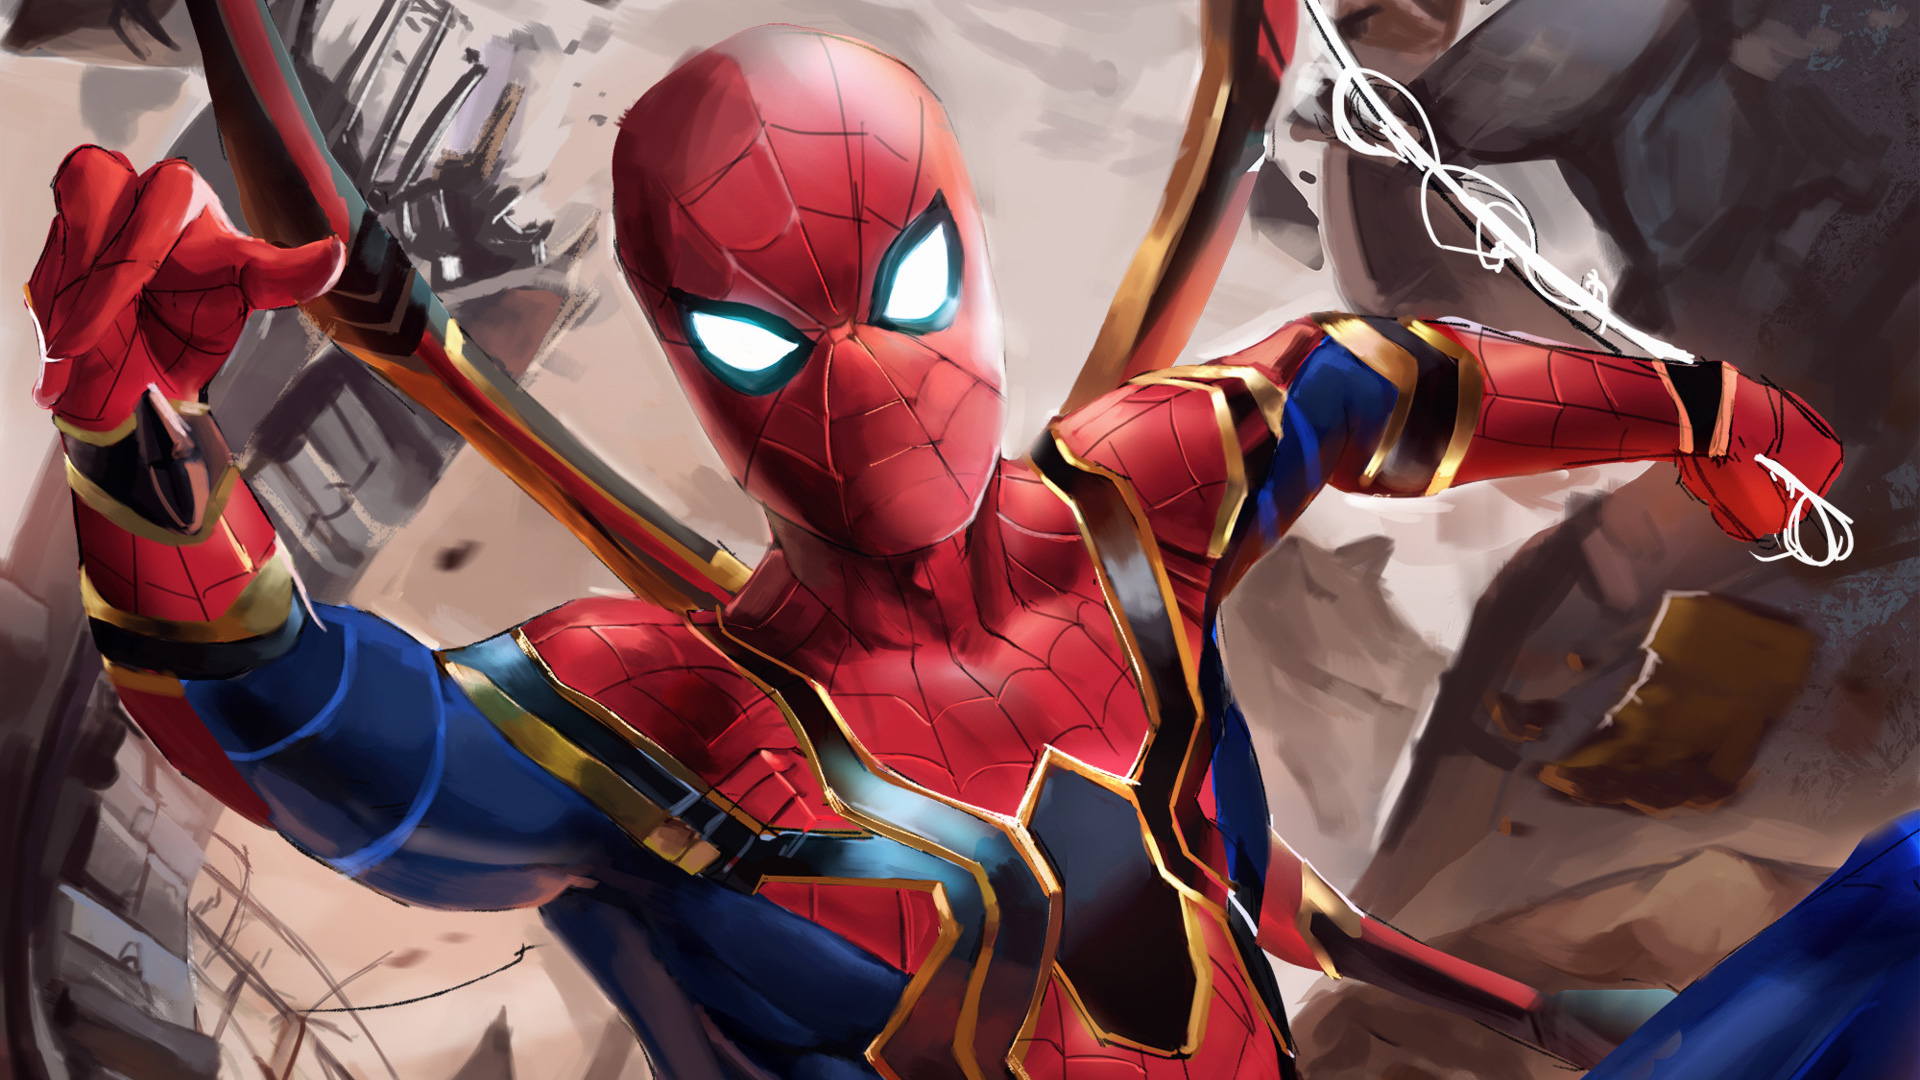 Iron Spider Suit In Avengers Infinity War by Jarhudpong Khewgor